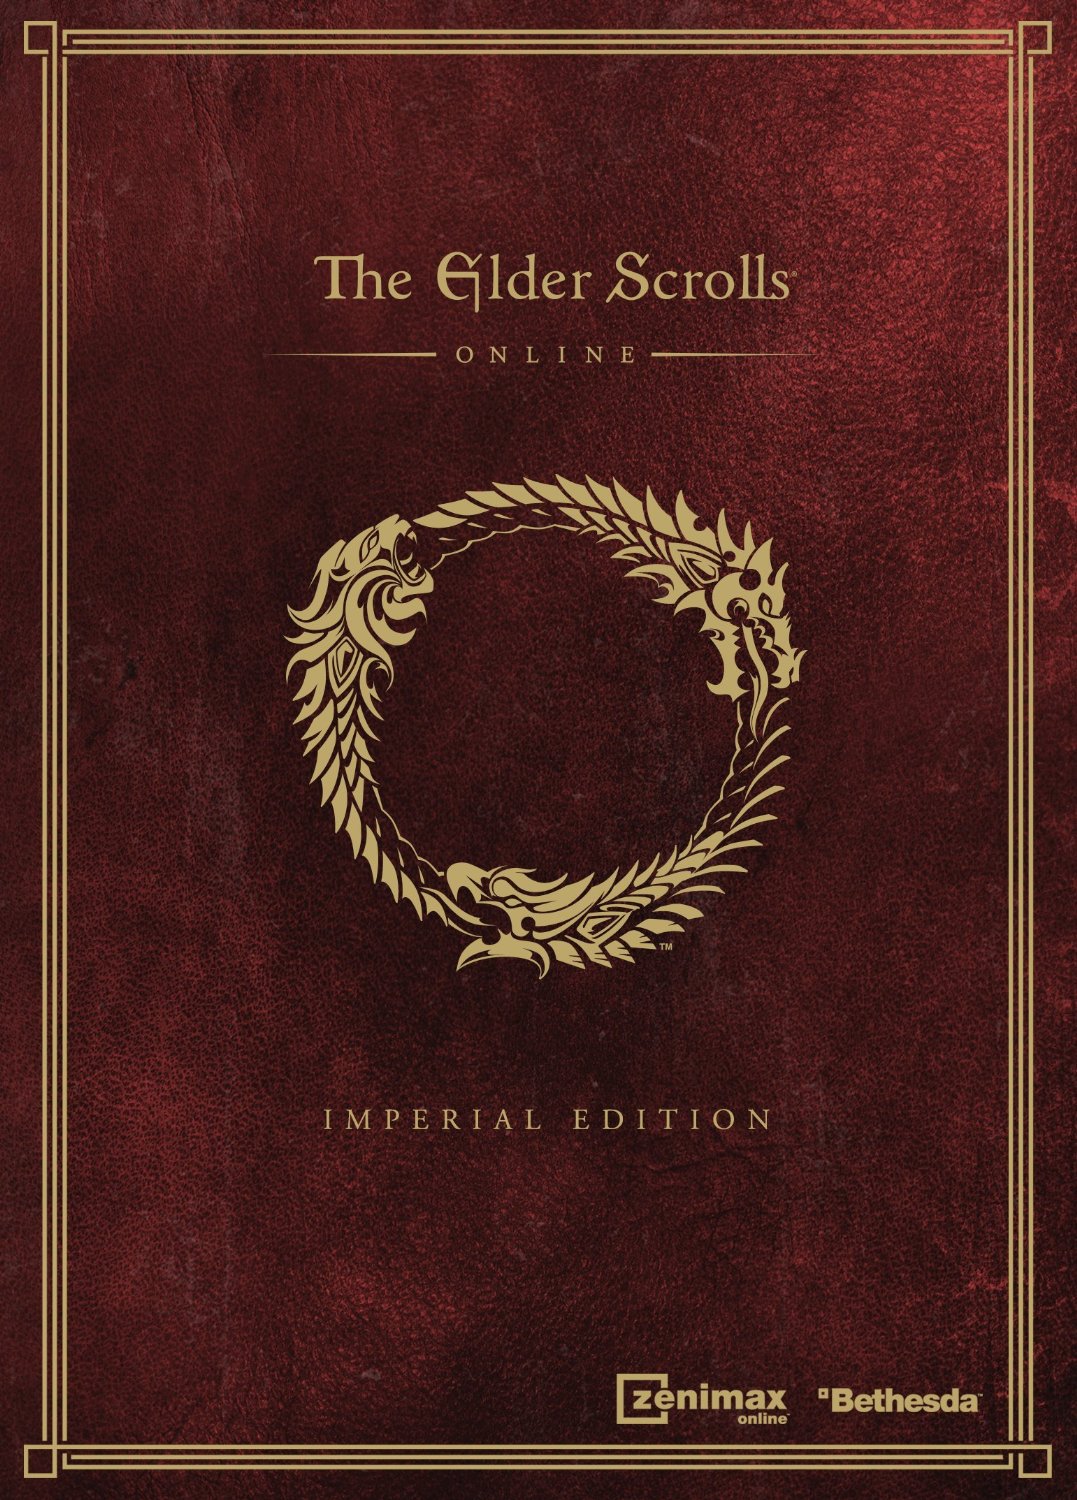 Online:Imperial Edition - The Unofficial Elder Scrolls Pages (UESP)